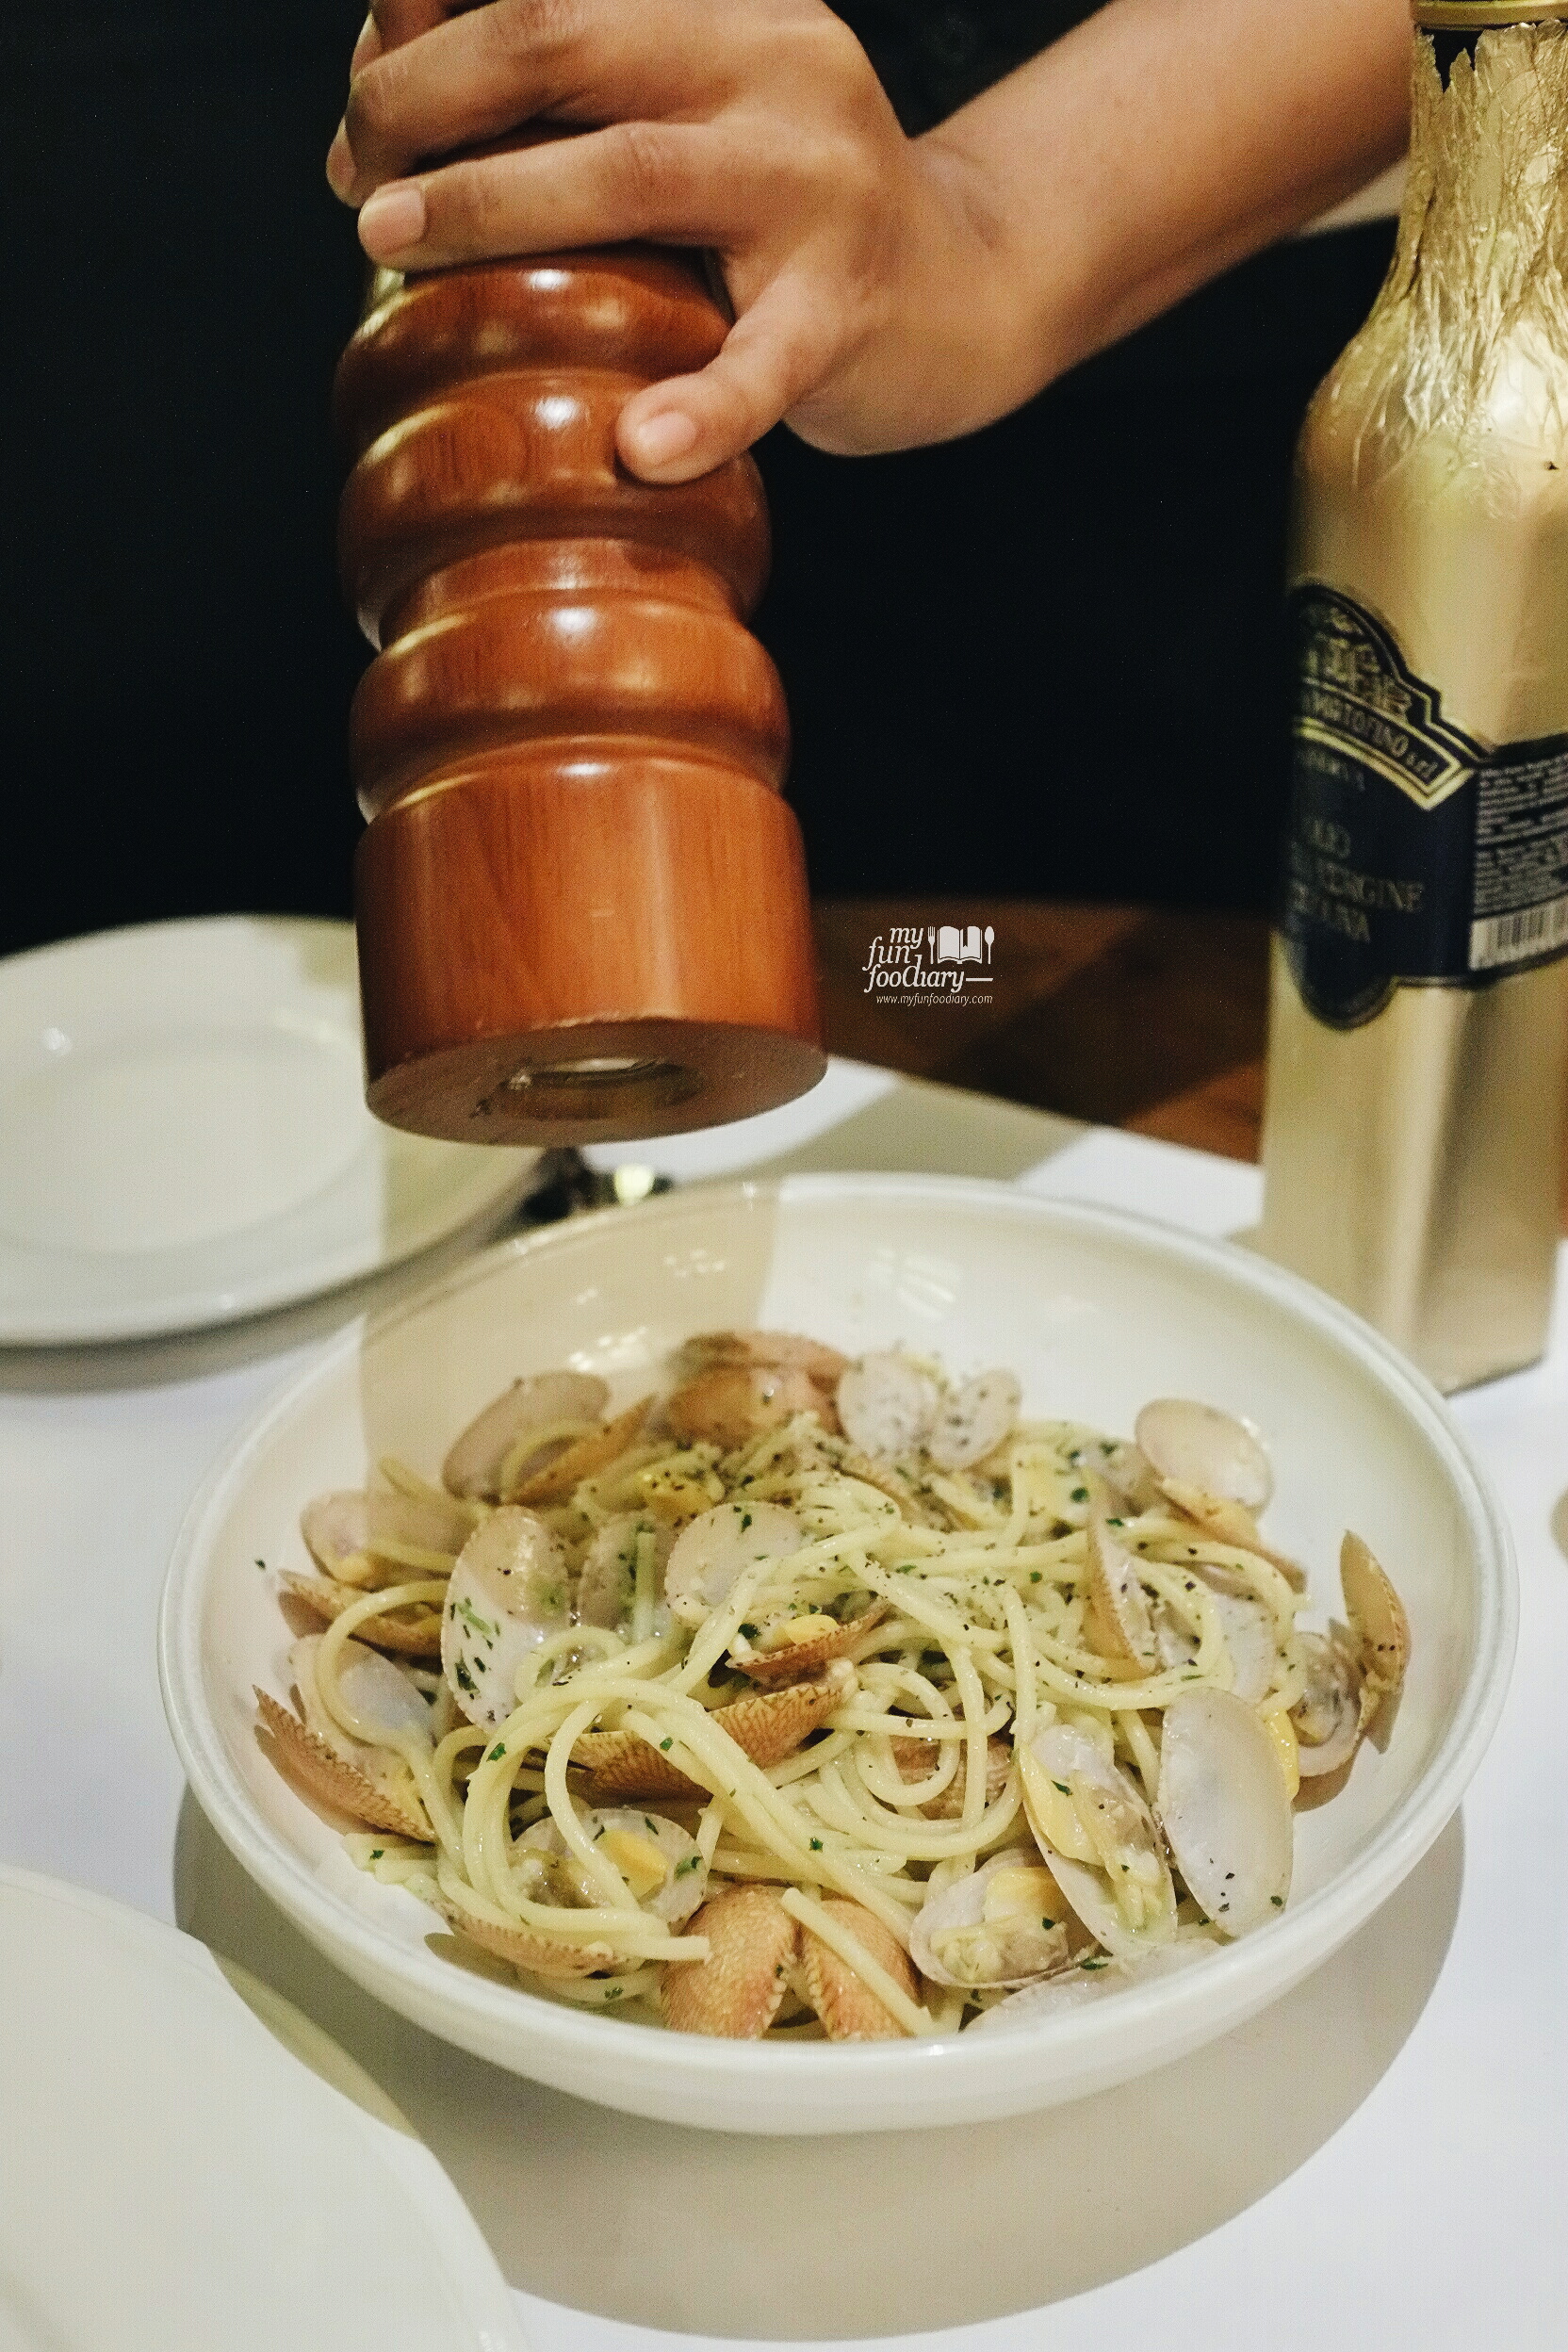 Blackpepper on pasta Caffe Milano by Myfunfoodiary